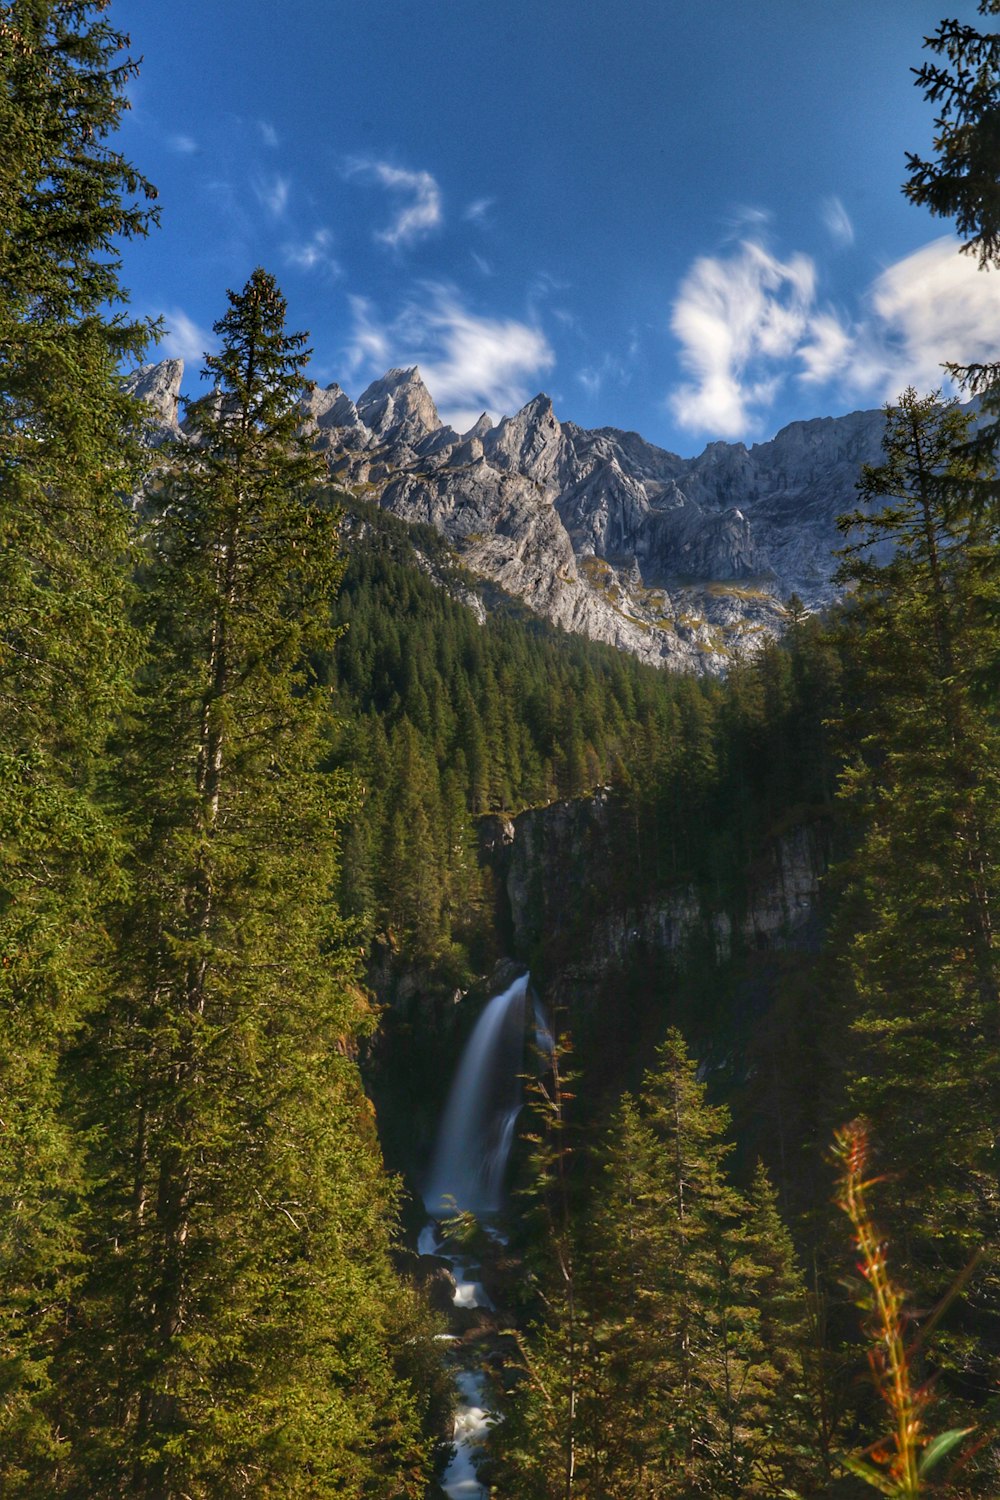 a waterfall in the middle of a forest with mountains in the background